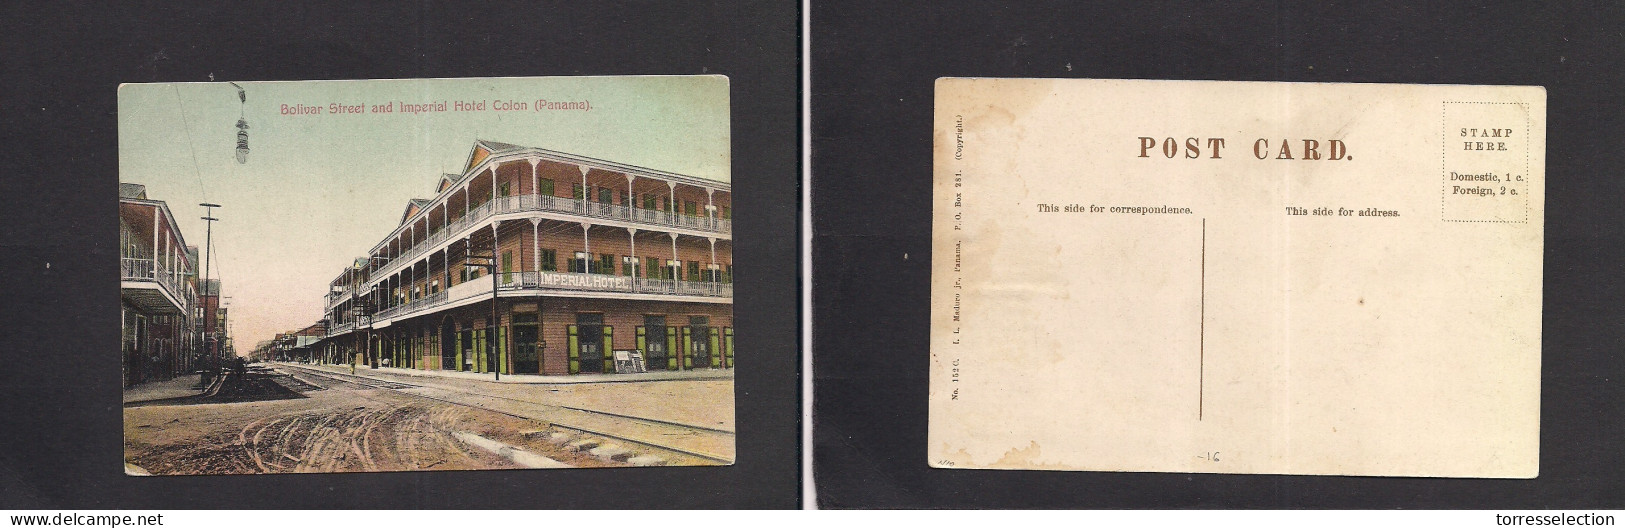 PANAMA. C. 1910s. Uncirculated Early Color Imperial Hotel Ppc. - Panama